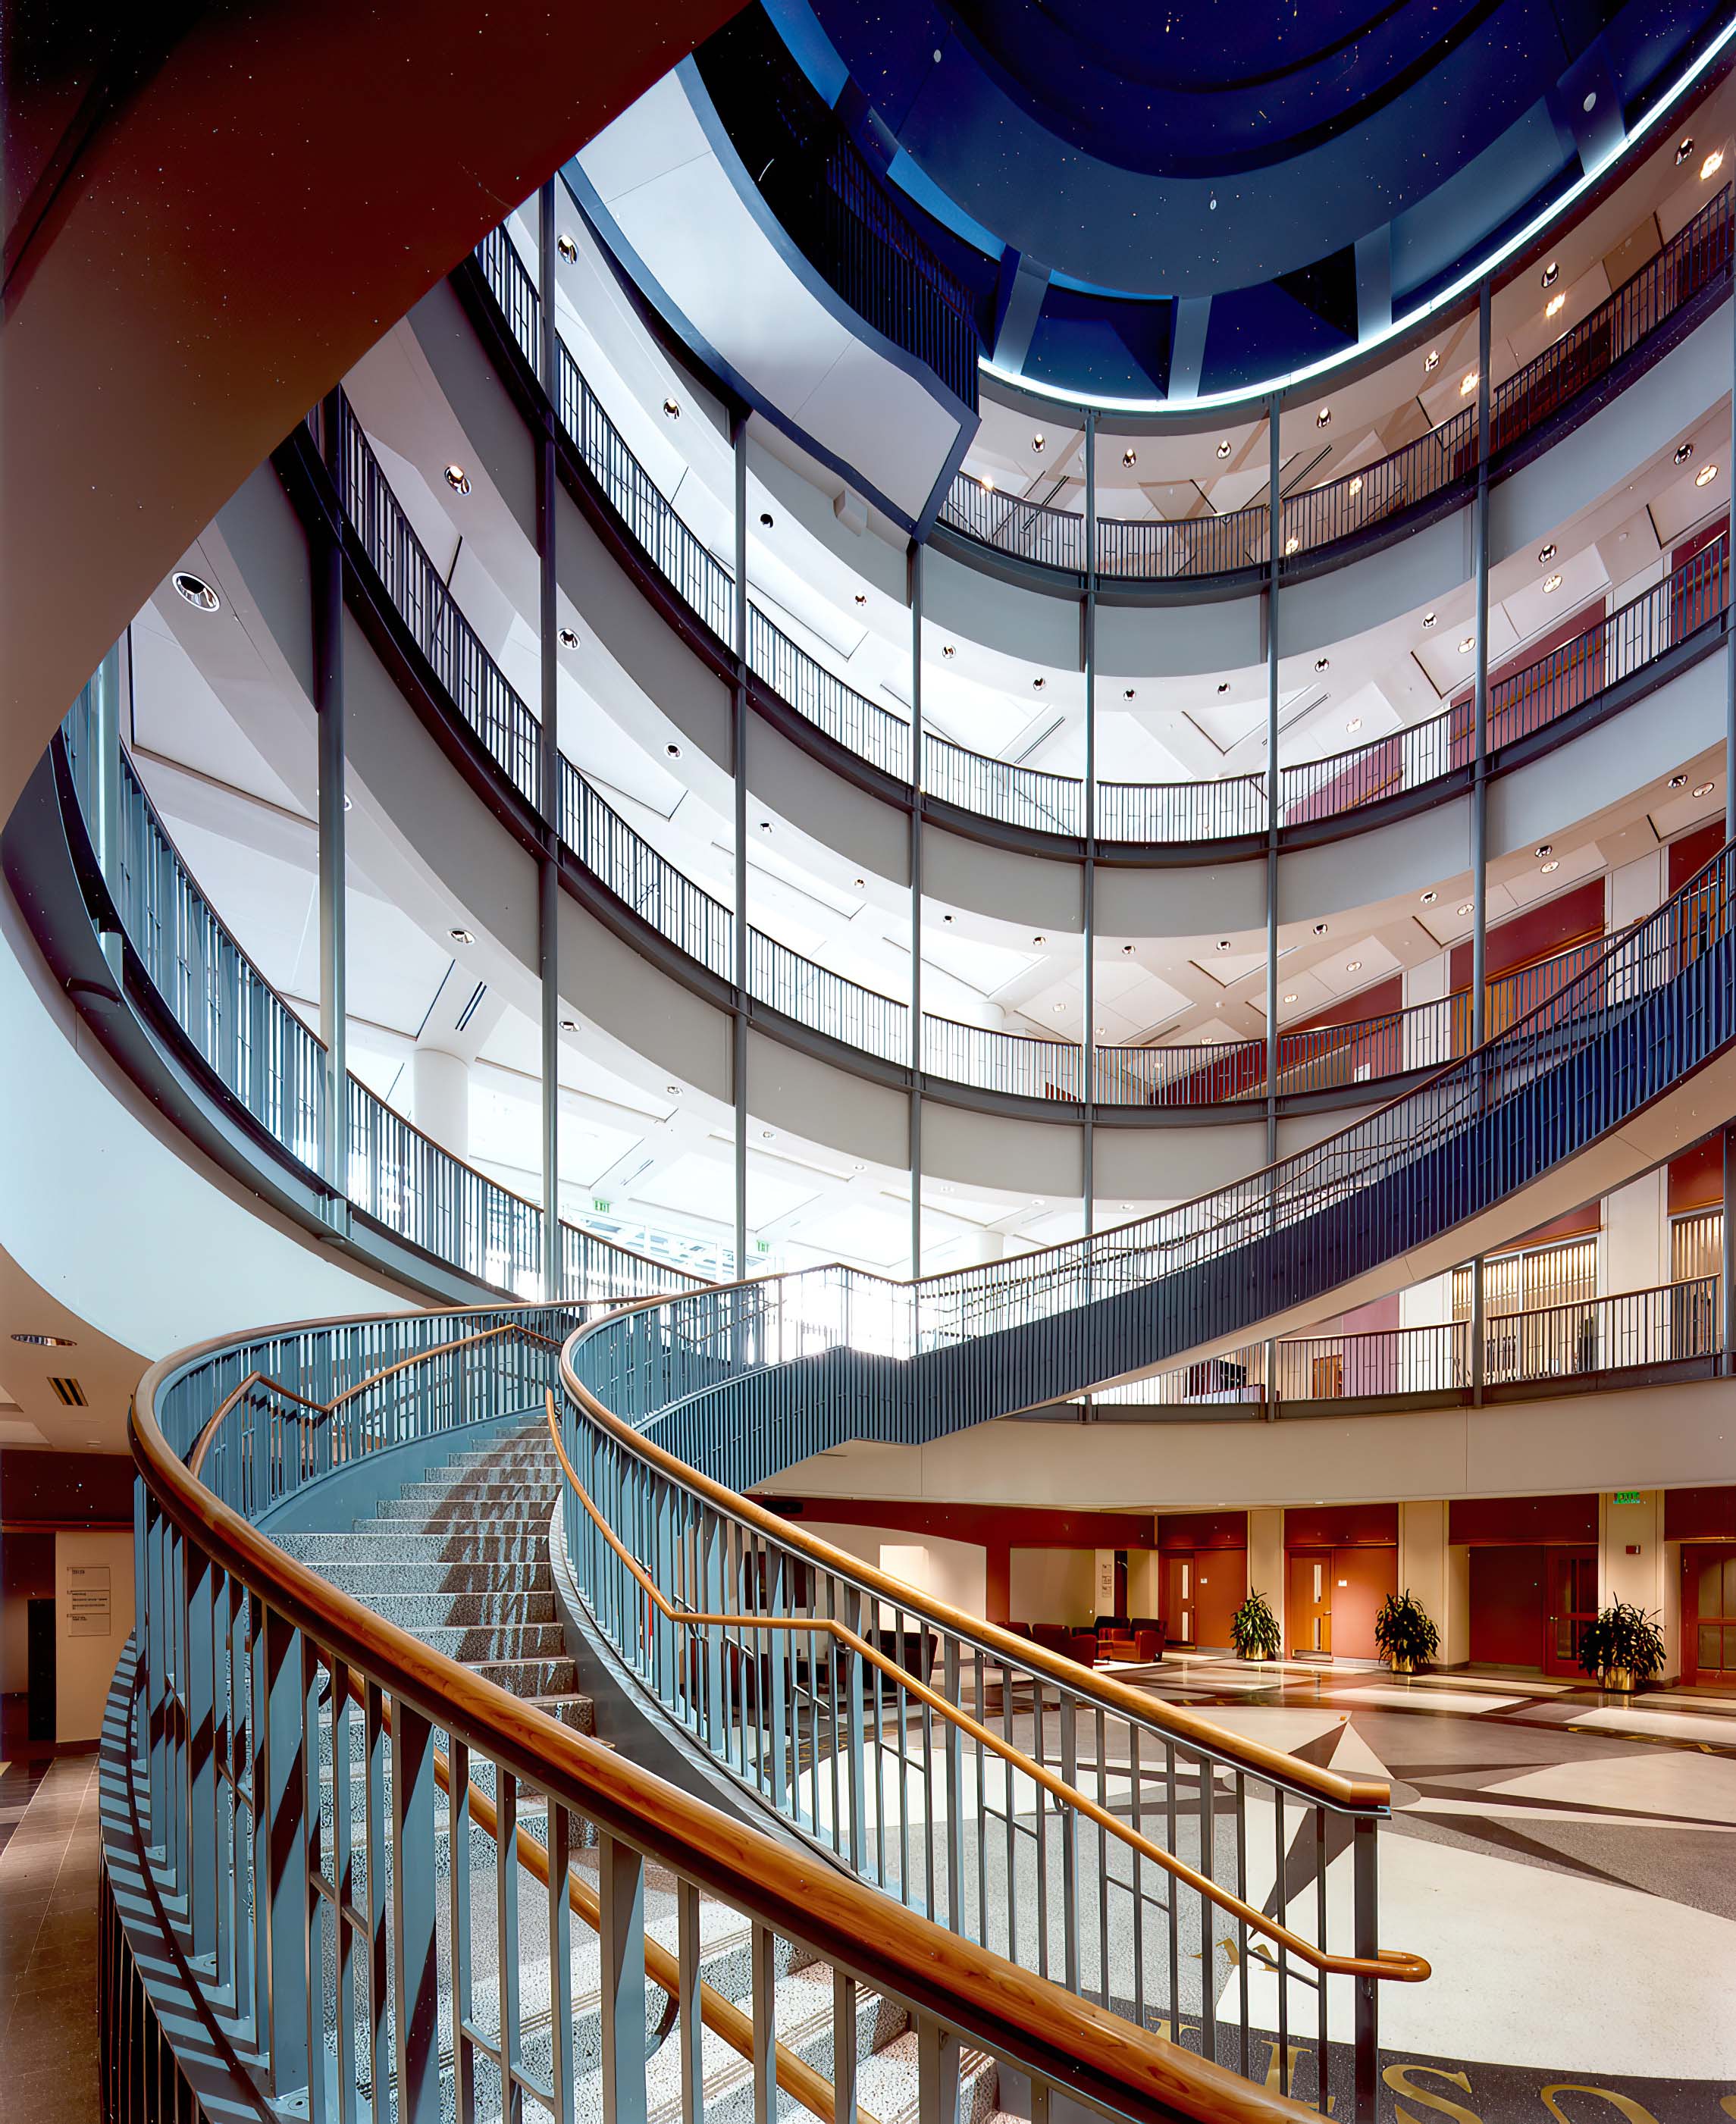 A 5-story circular room with balconies overlooking the first floor atrium where a curving staircase begins.